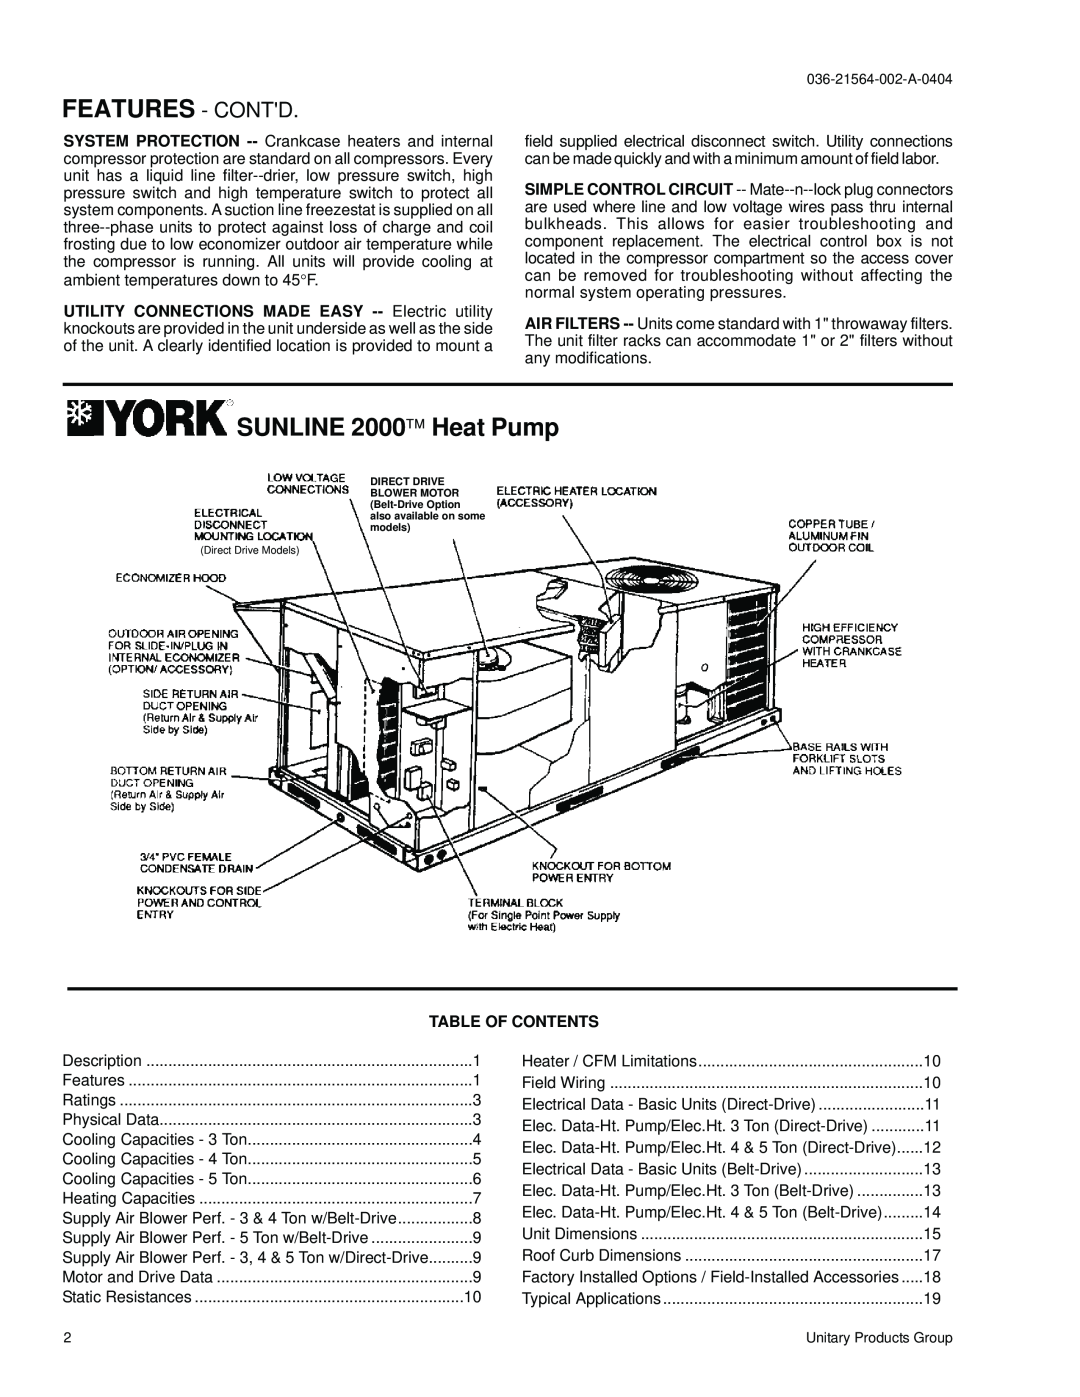 York B3CH 036, 60, B5CH 036, B6CH 048 warranty Features - Contd, SUNLINE 2000 Heat Pump, Table Of Contents 